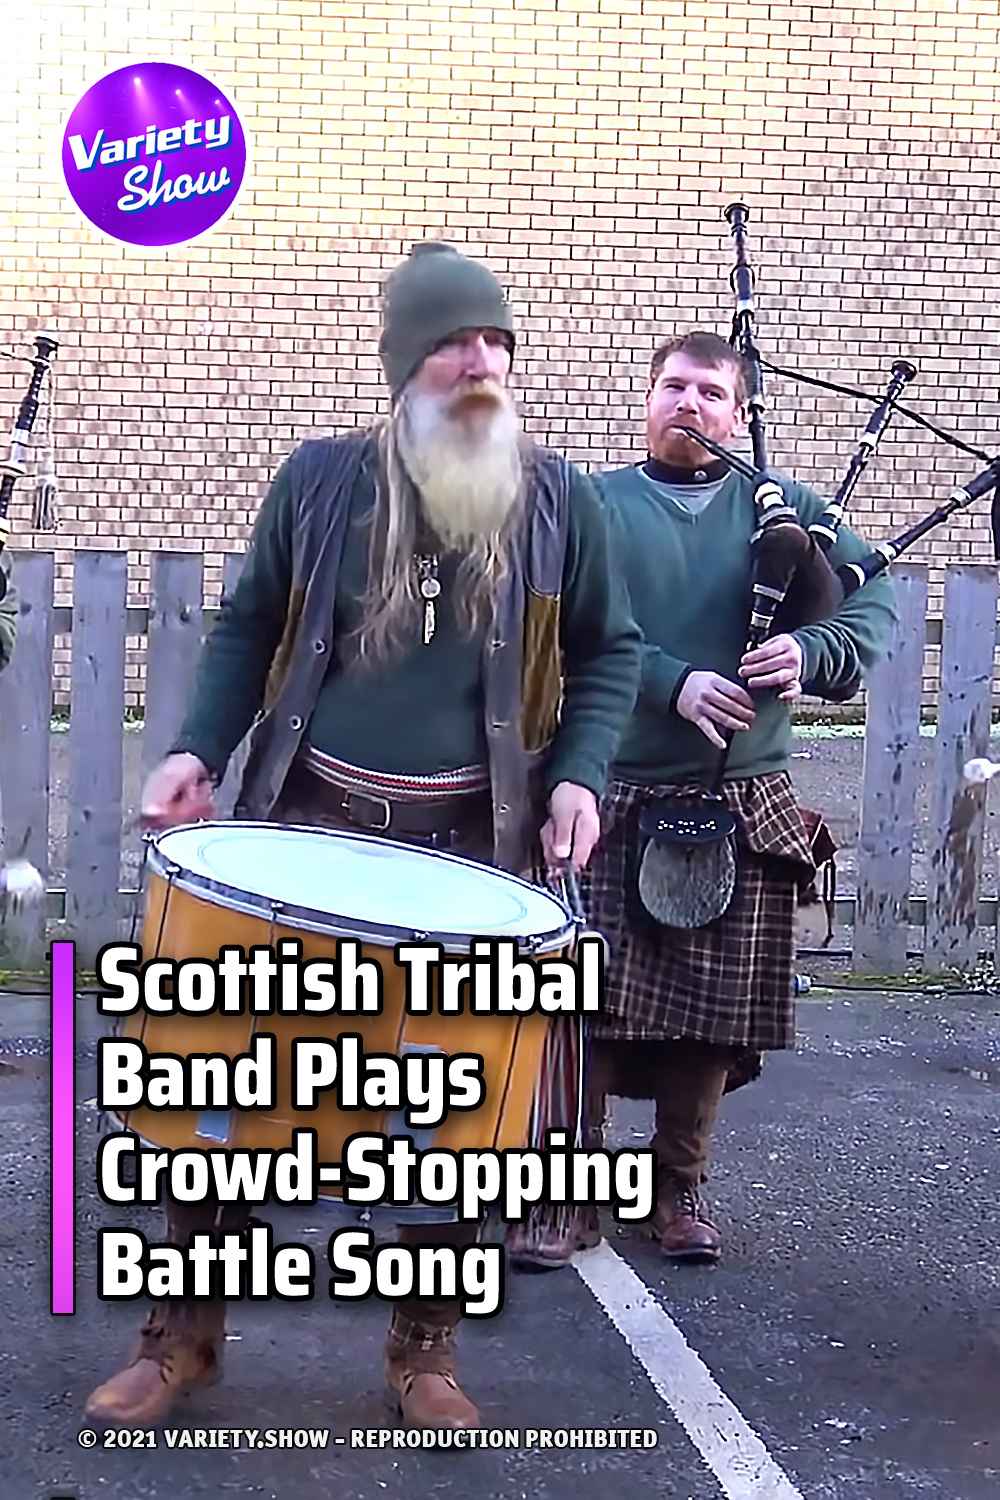 Scottish Tribal Band Plays Crowd-Stopping Battle Song